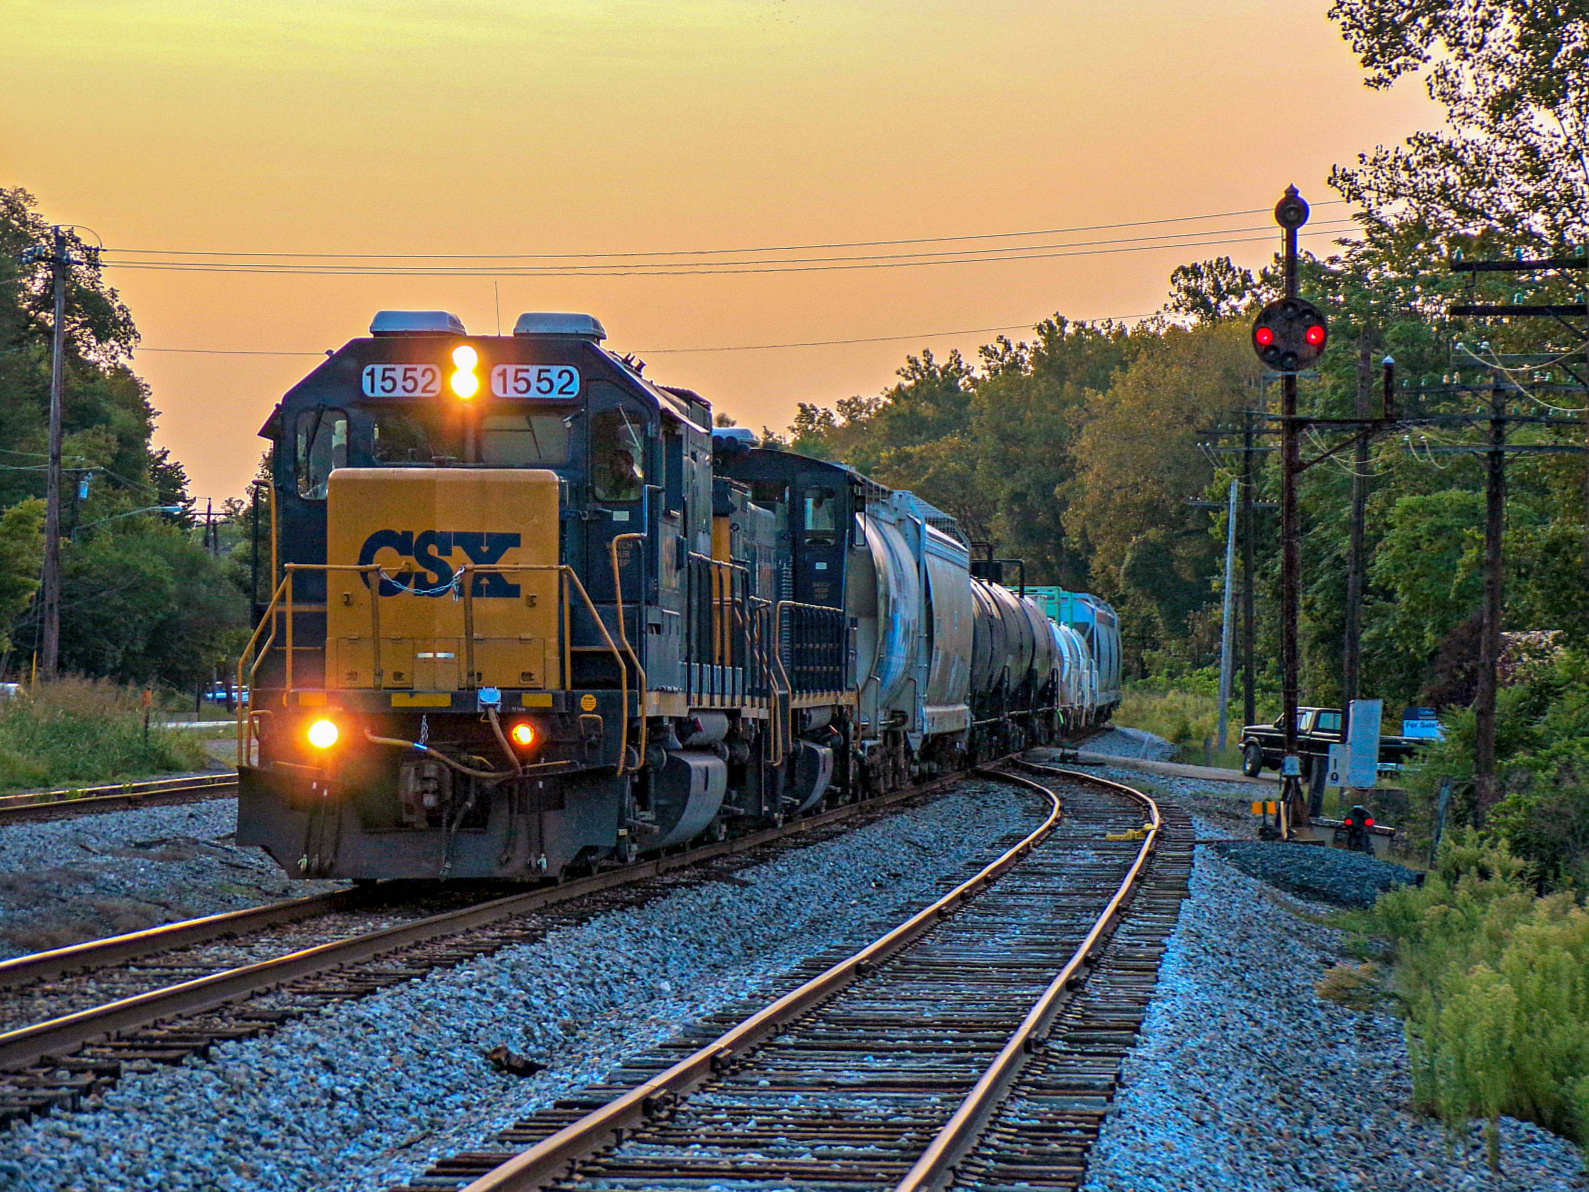 CSXT 1552 is a class EMD GP15-1 and  is pictured in Delhi, OH, United States.  This was taken along the Indiana Subdivision on the CSX Transportation. Photo Copyright: David Rohdenburg uploaded to Railroad Gallery on 02/16/2023. This photograph of CSXT 1552 was taken on Friday, August 25, 2017. All Rights Reserved. 